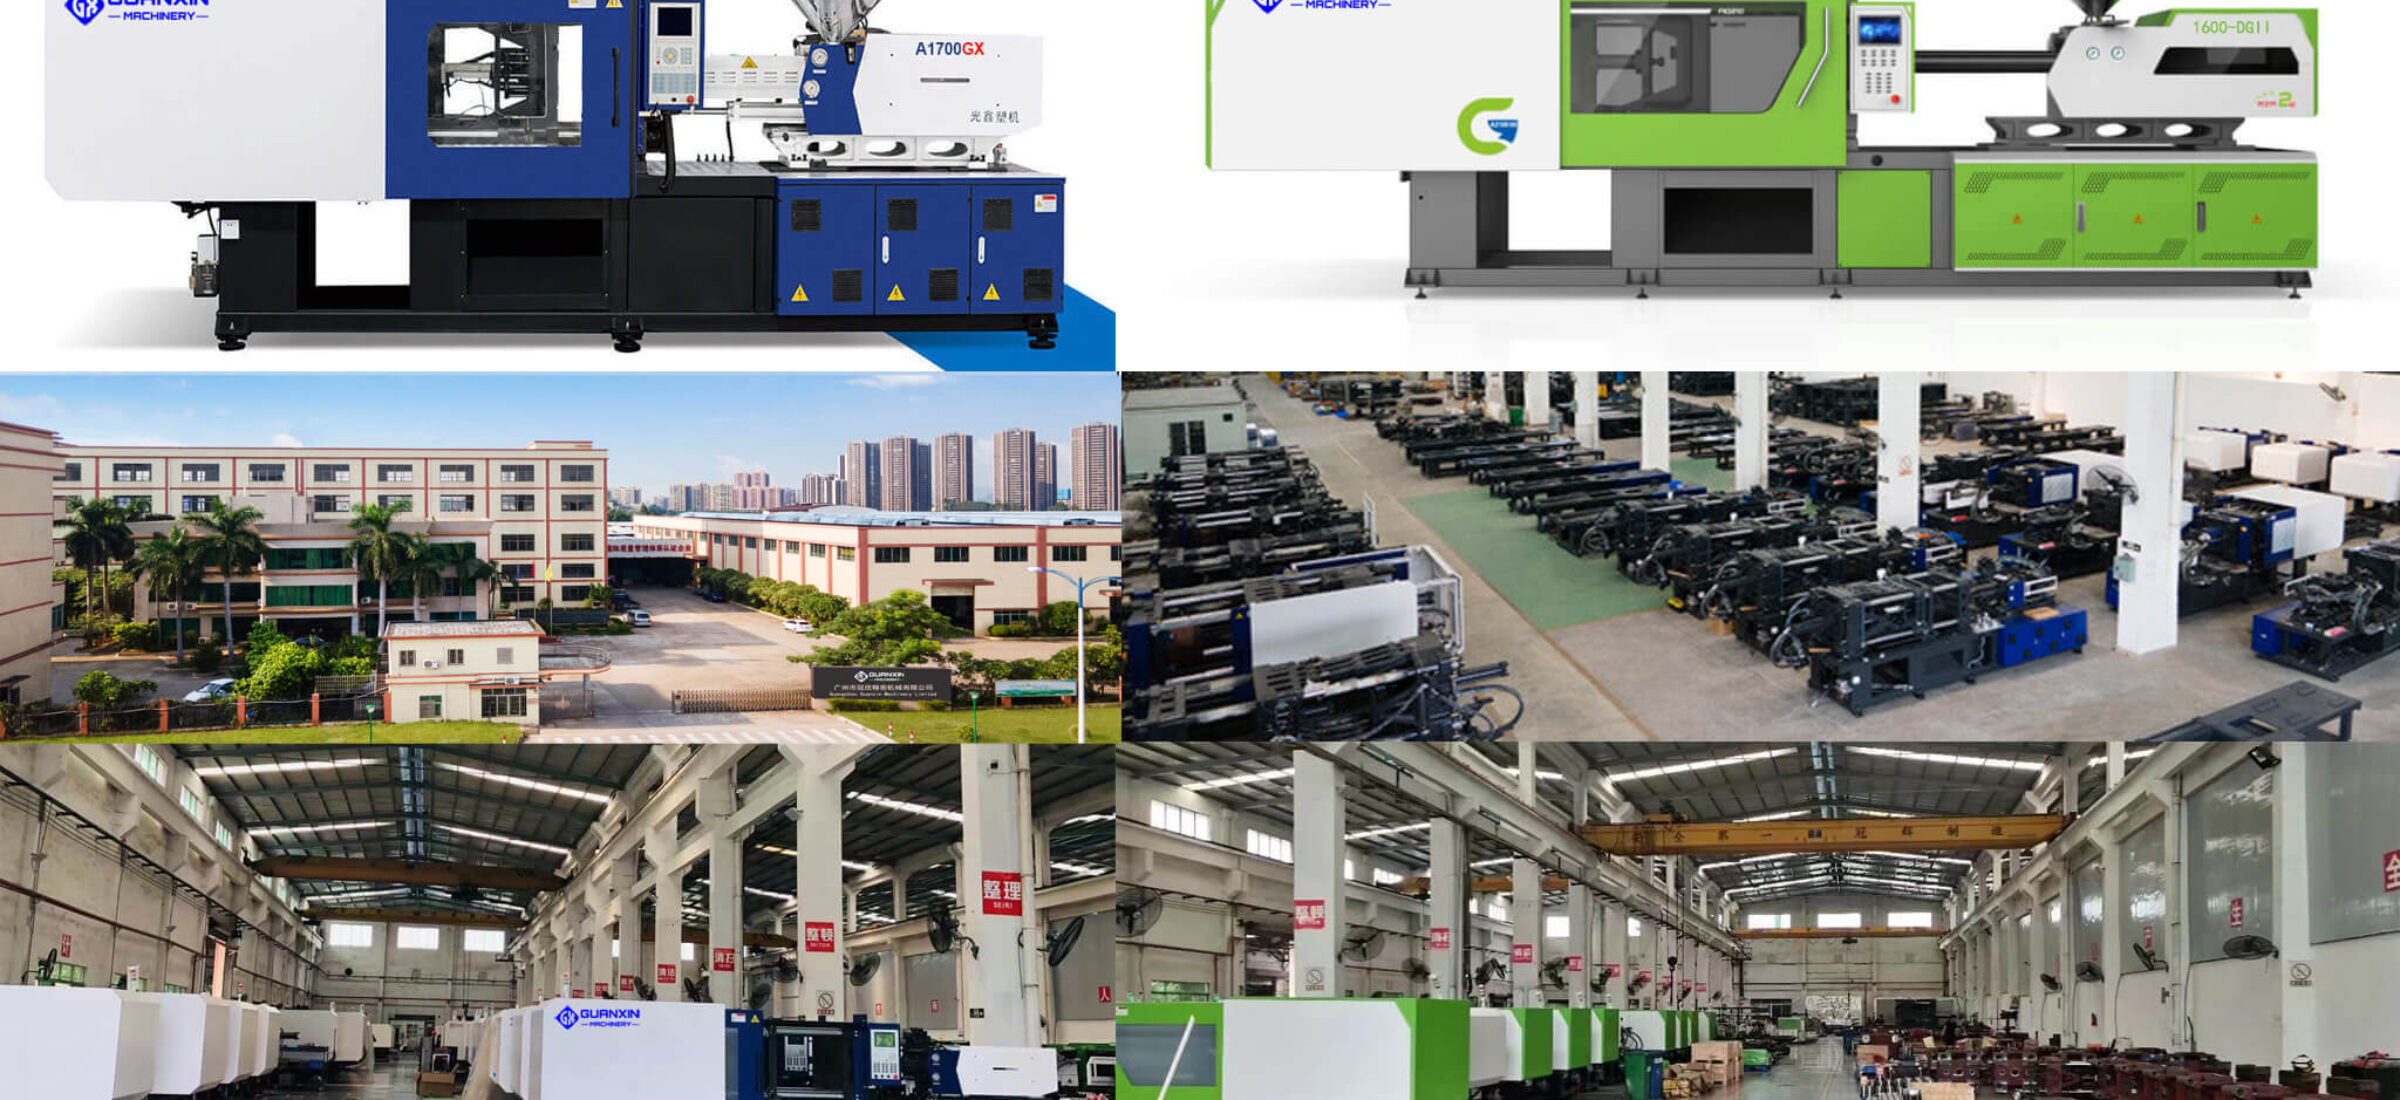 Top Branded Plastic Injection Molding Machine Manufacturers Worldwide 2023